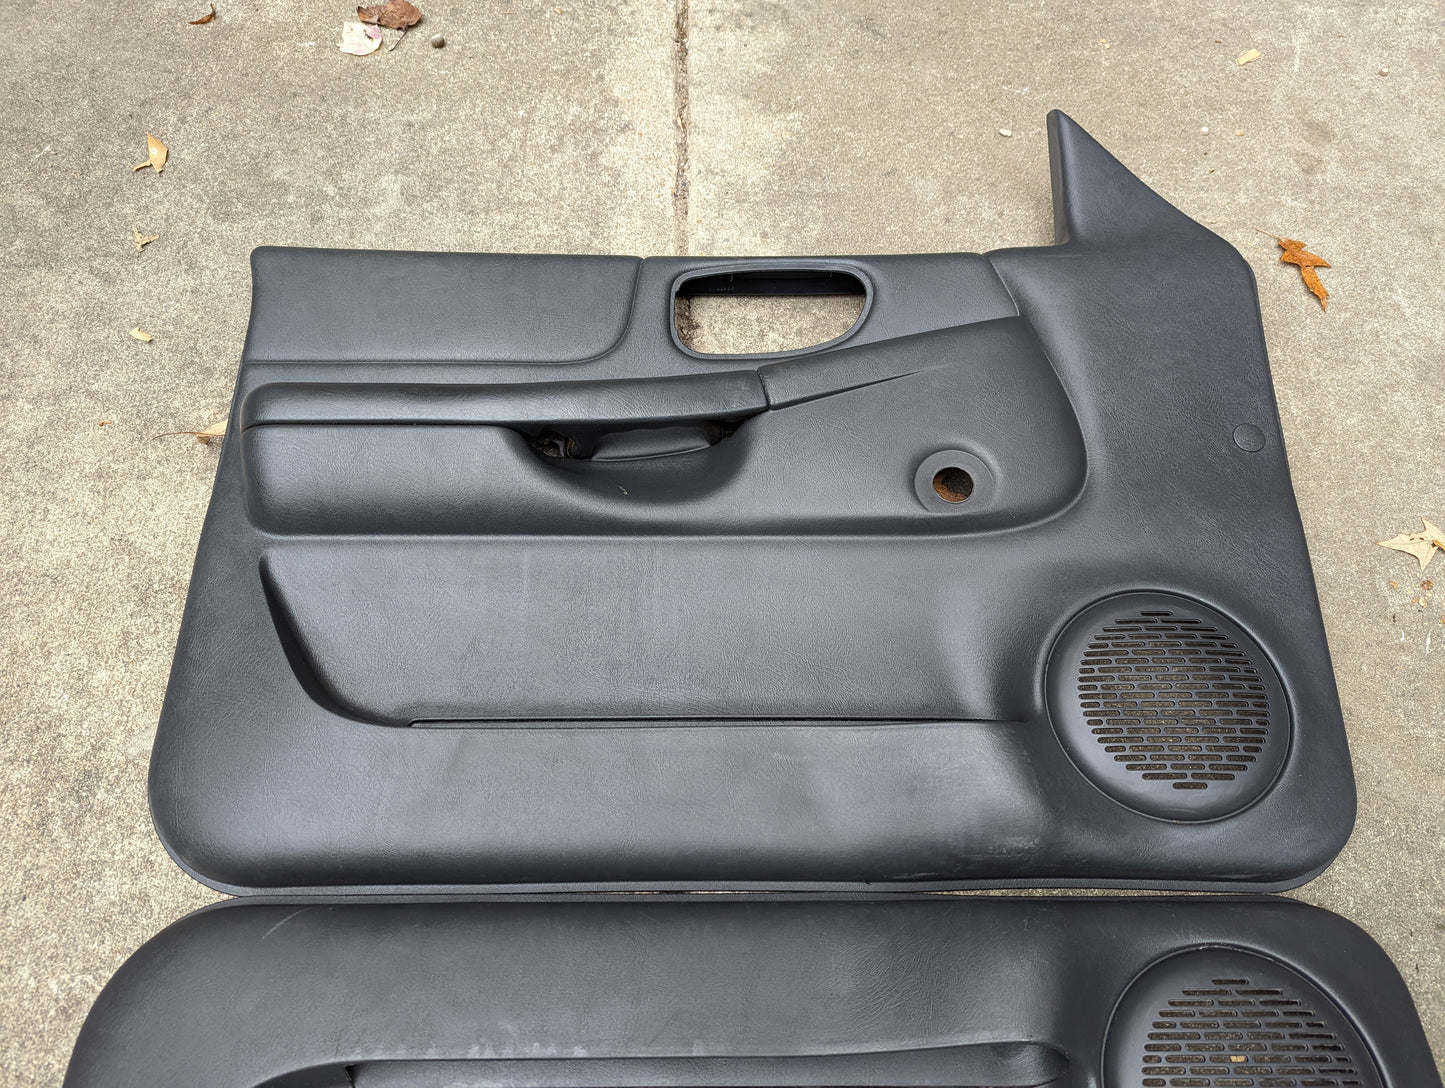 OEM Pair of Front Manual Door Panels in Dark Gray for 1998-2005 Chevy S10 GMC Sonoma and more